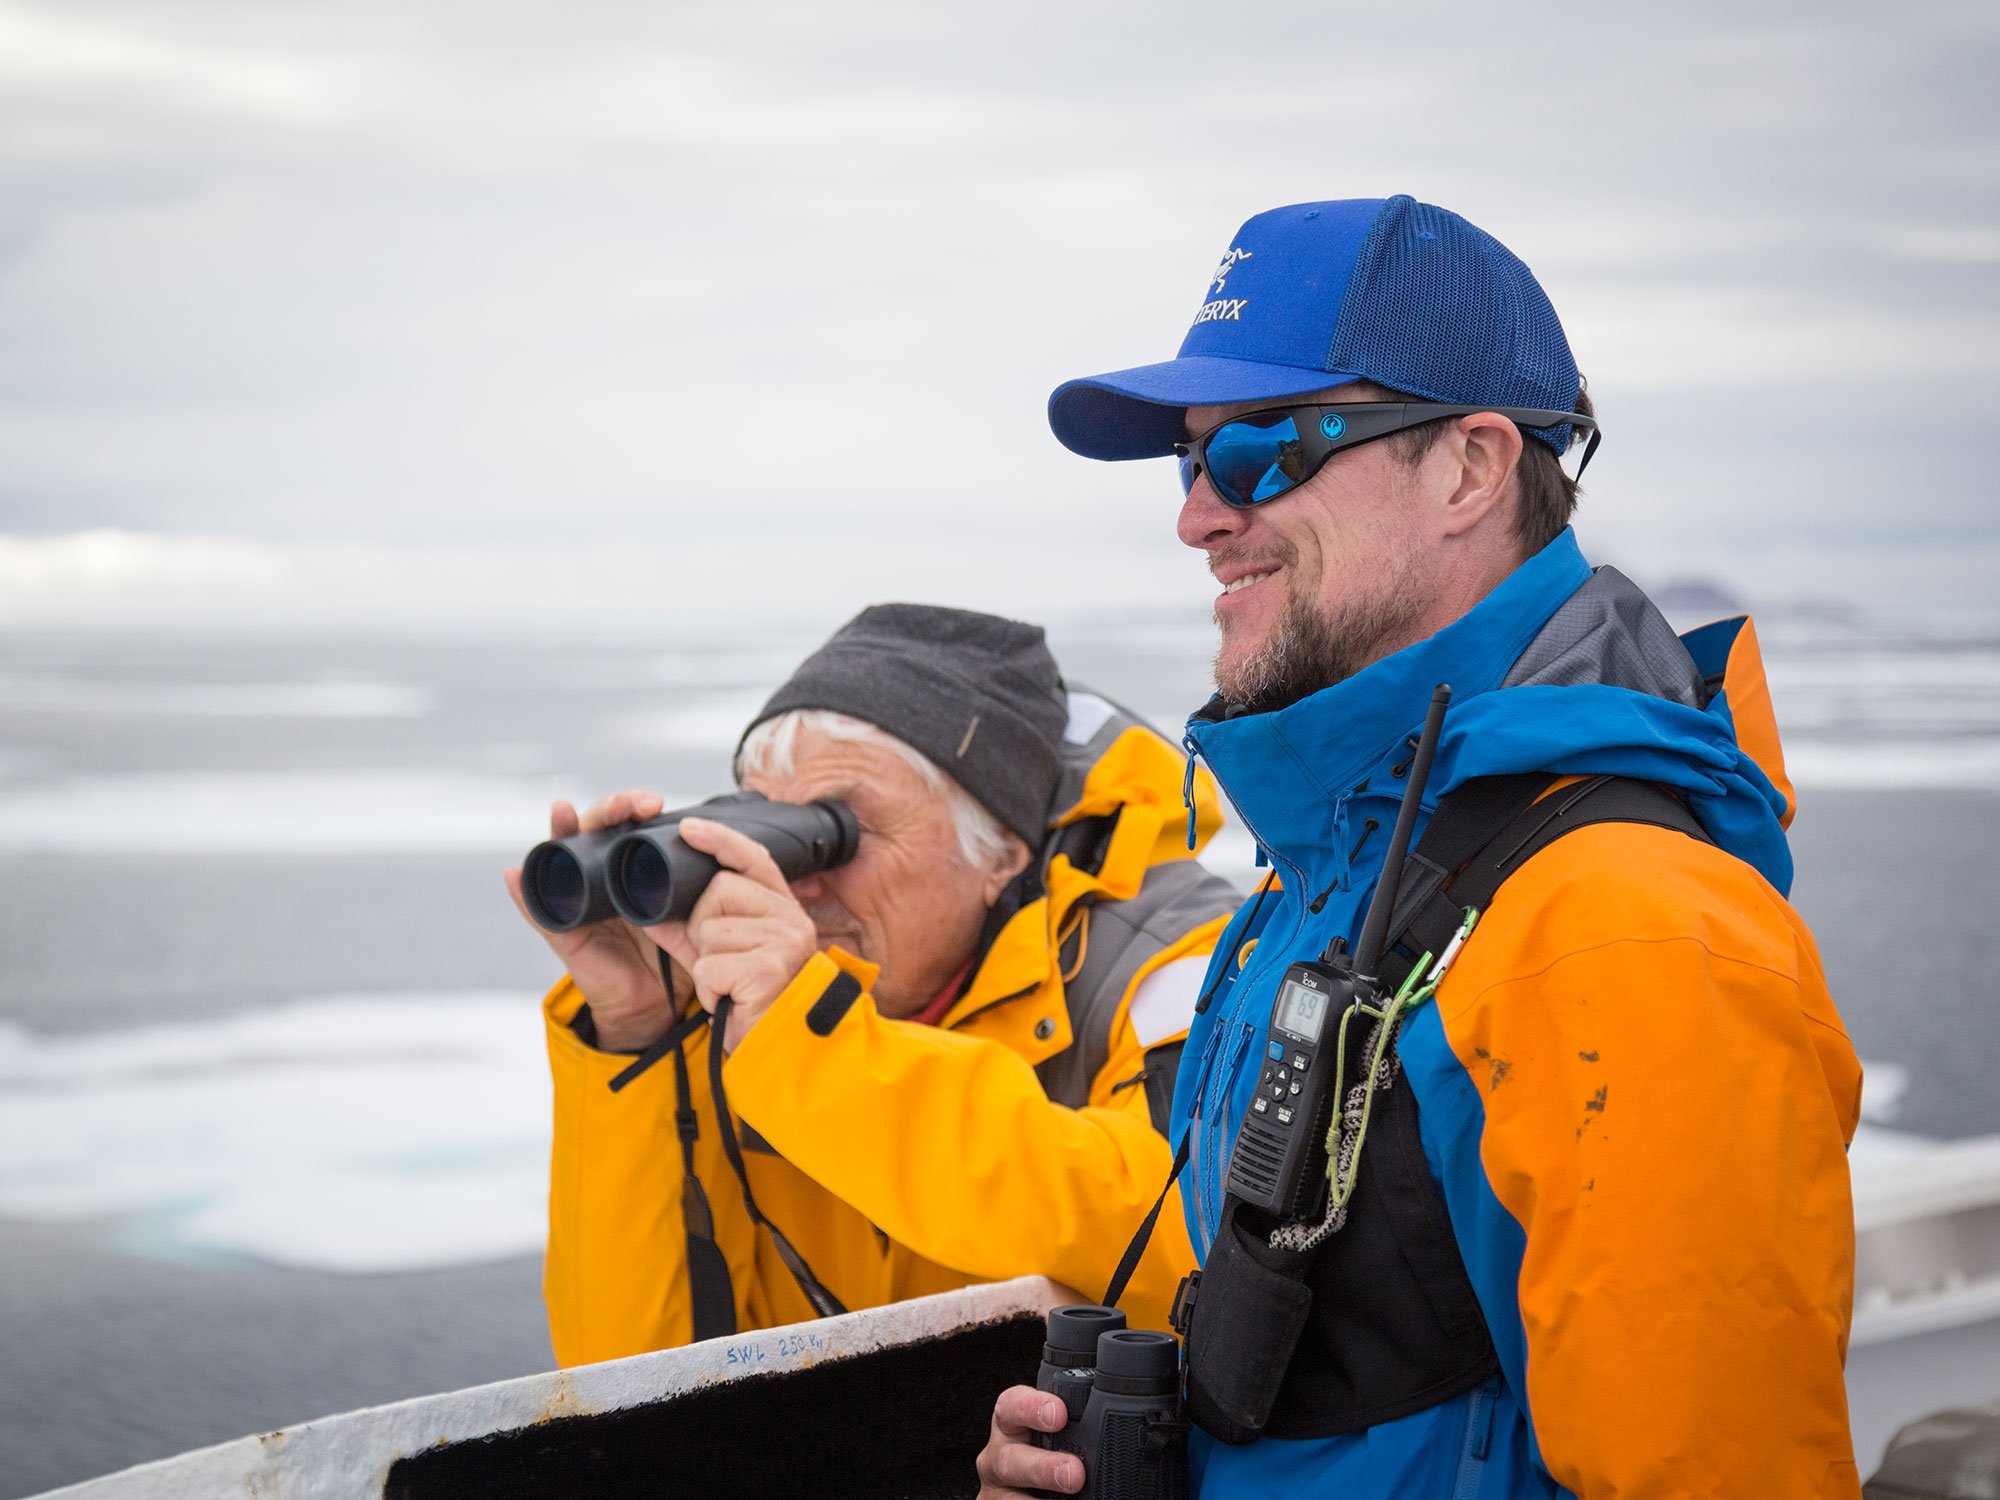 Bird-watching in the Polar Regions with Quark Expeditions.